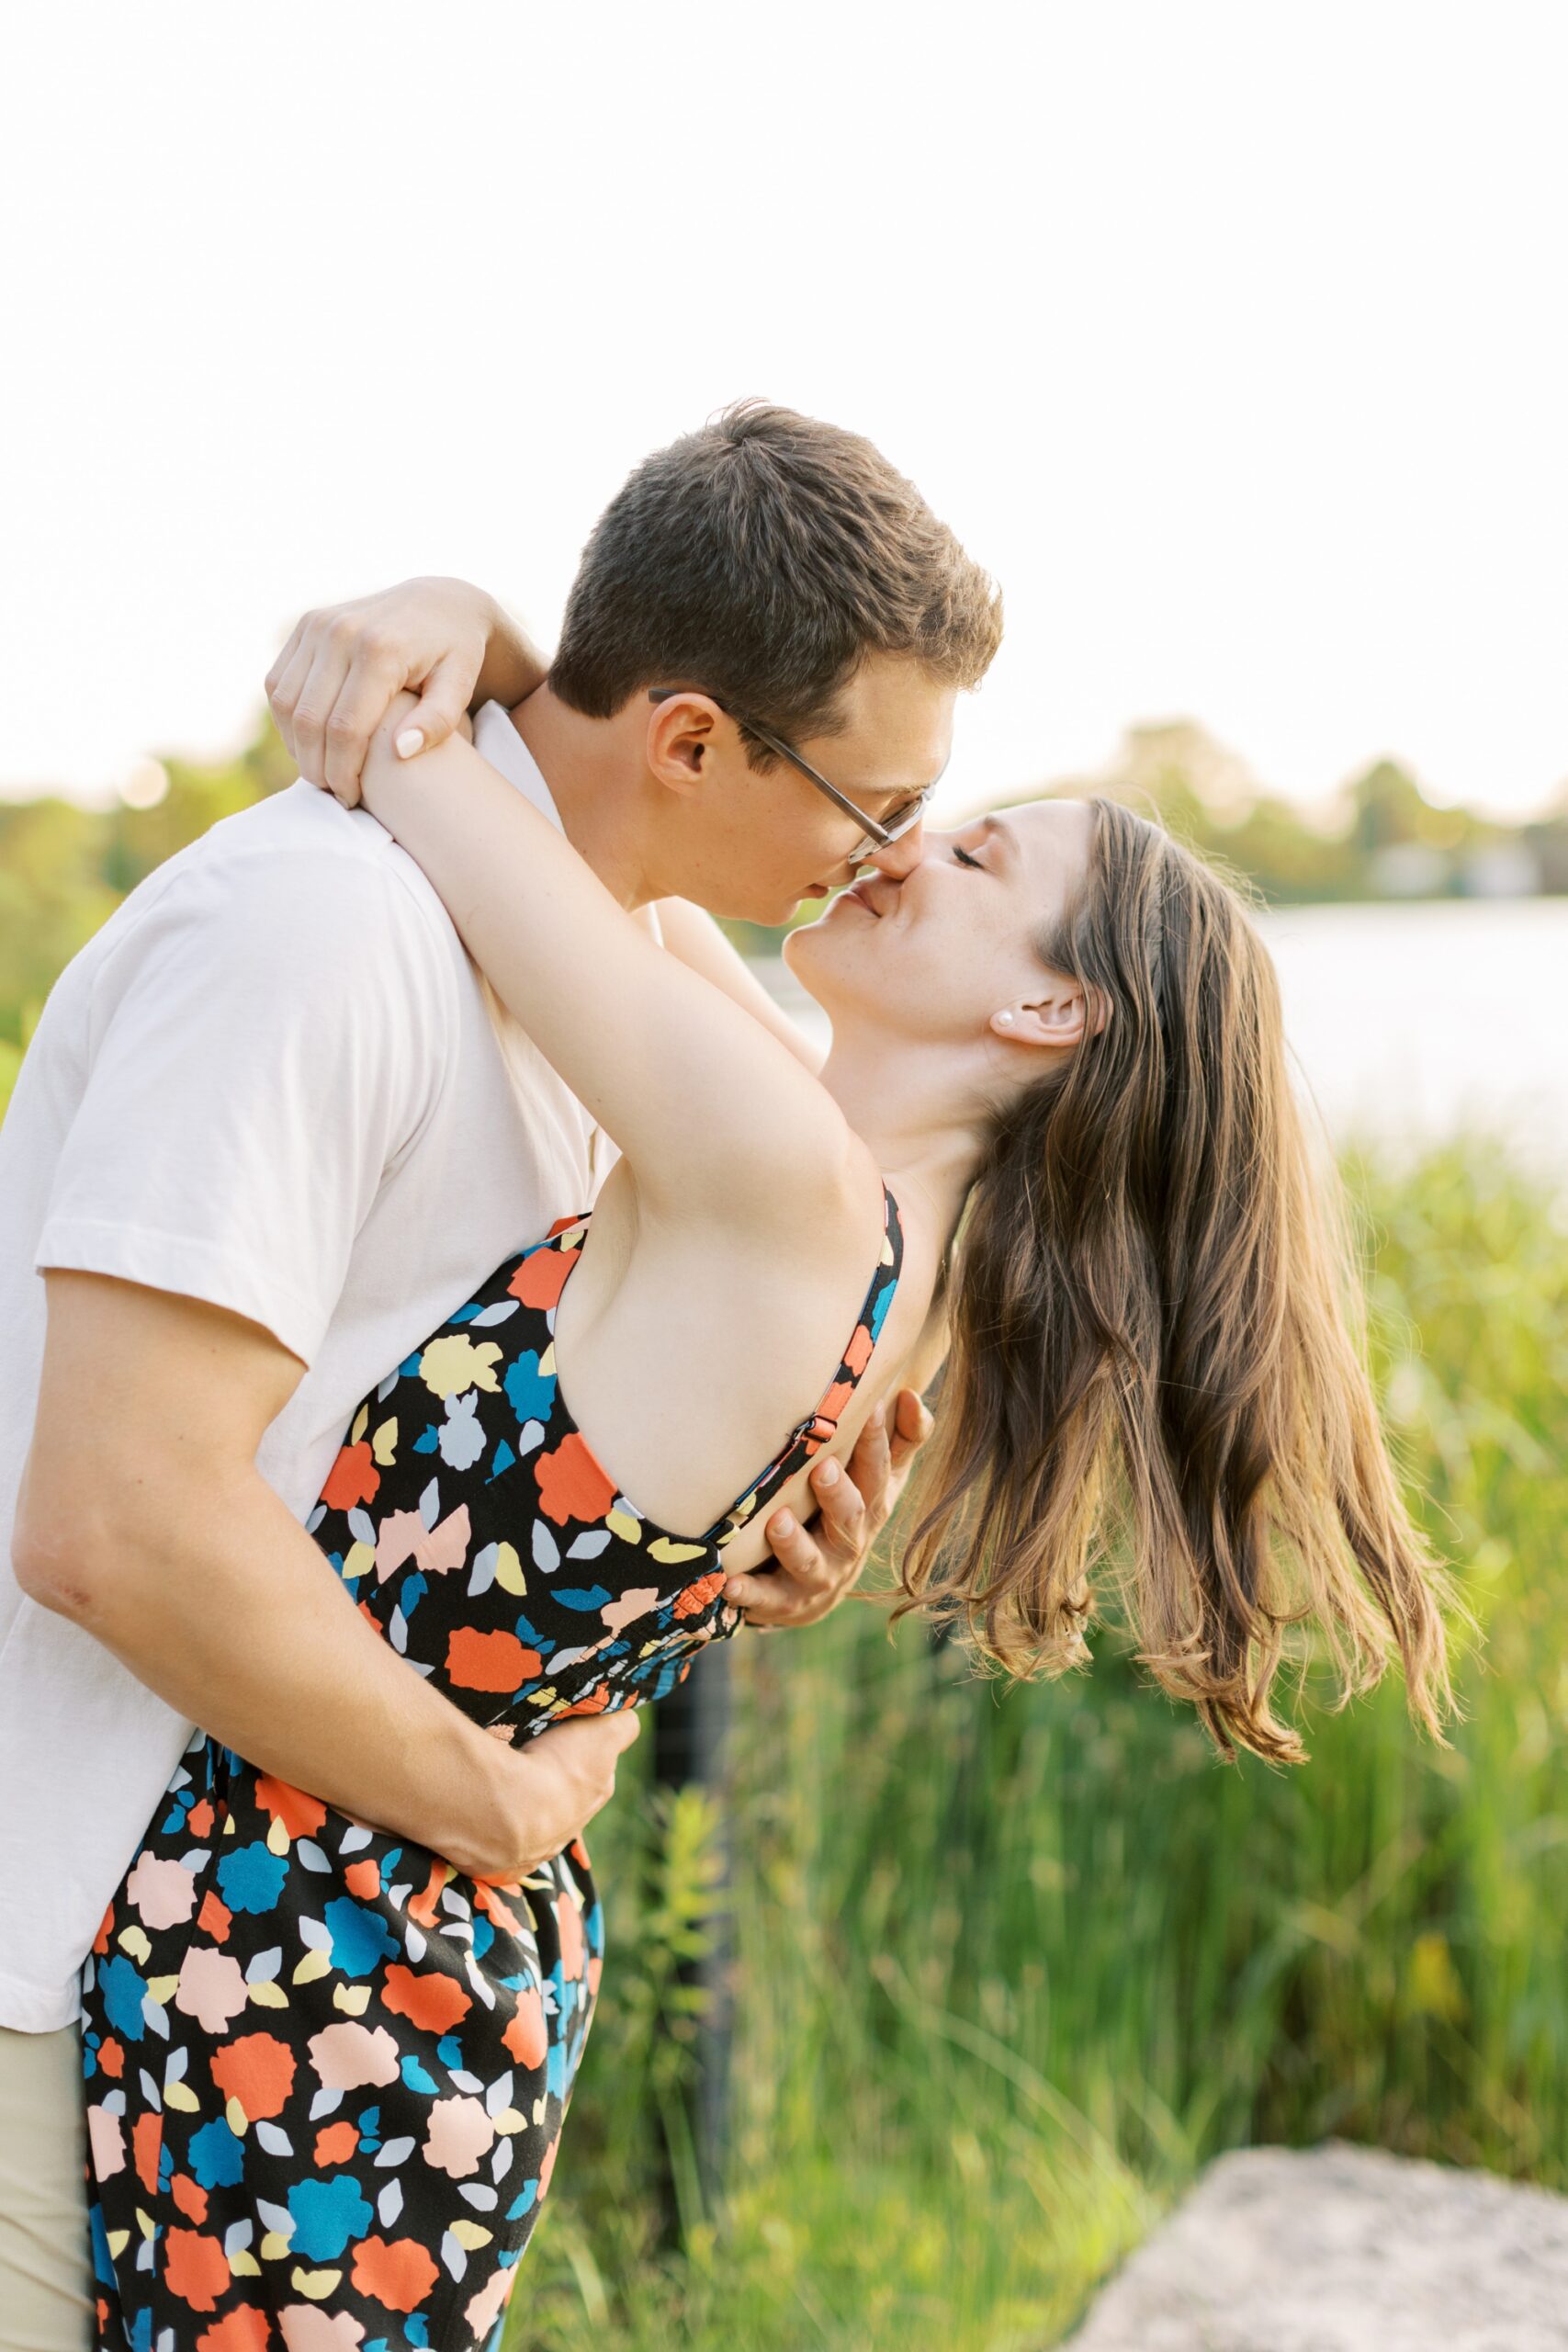 the man and woman kissed during their engagement photoshoot